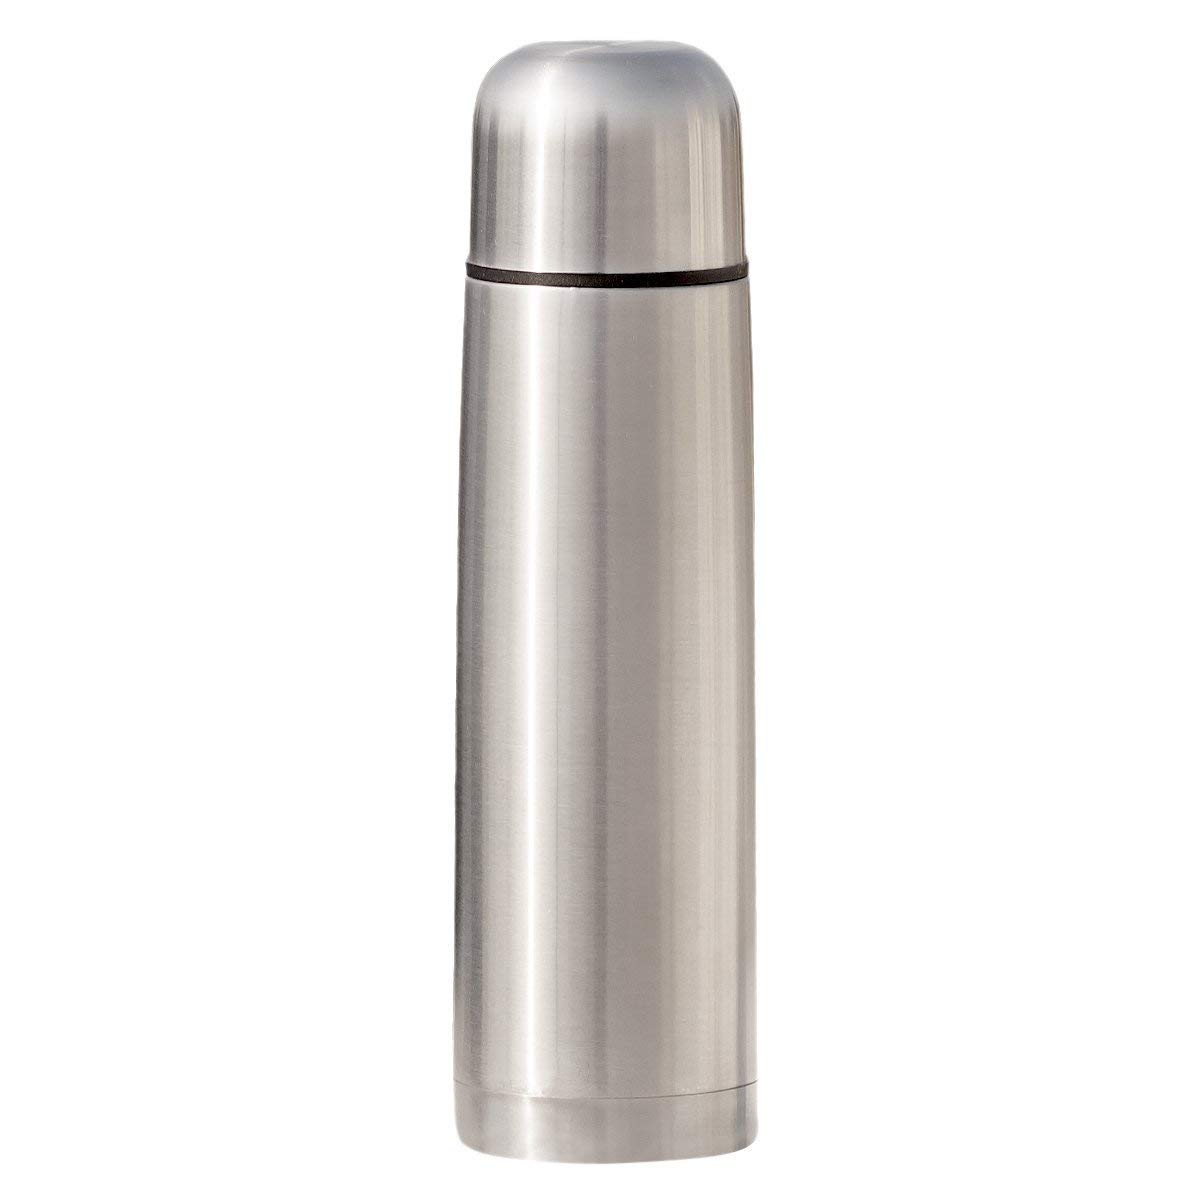 Details about   1L-2L Stainless Steel Thermos Flask Insulated Good Carry Handle Keeps Coffee Hot 